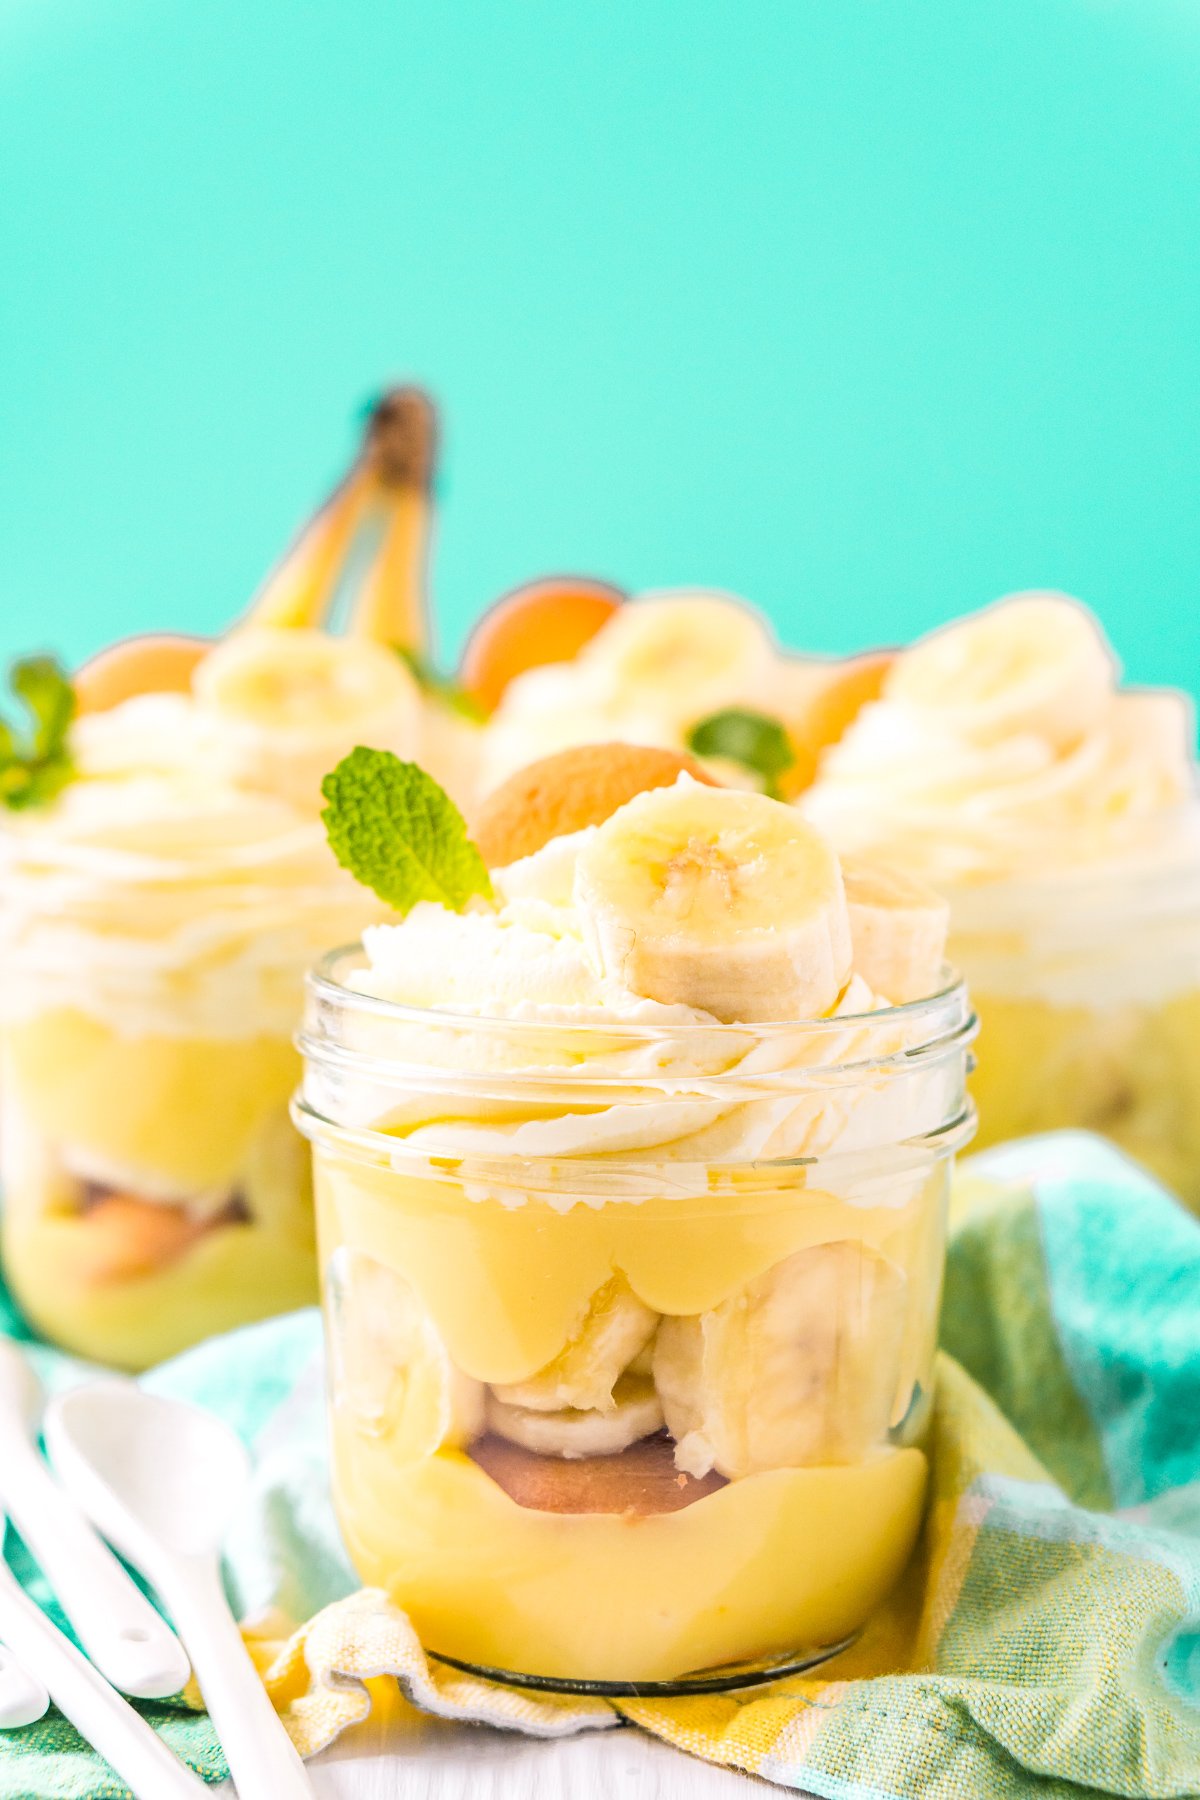 Jars of banana pudding ready to be served on a blue napkin.